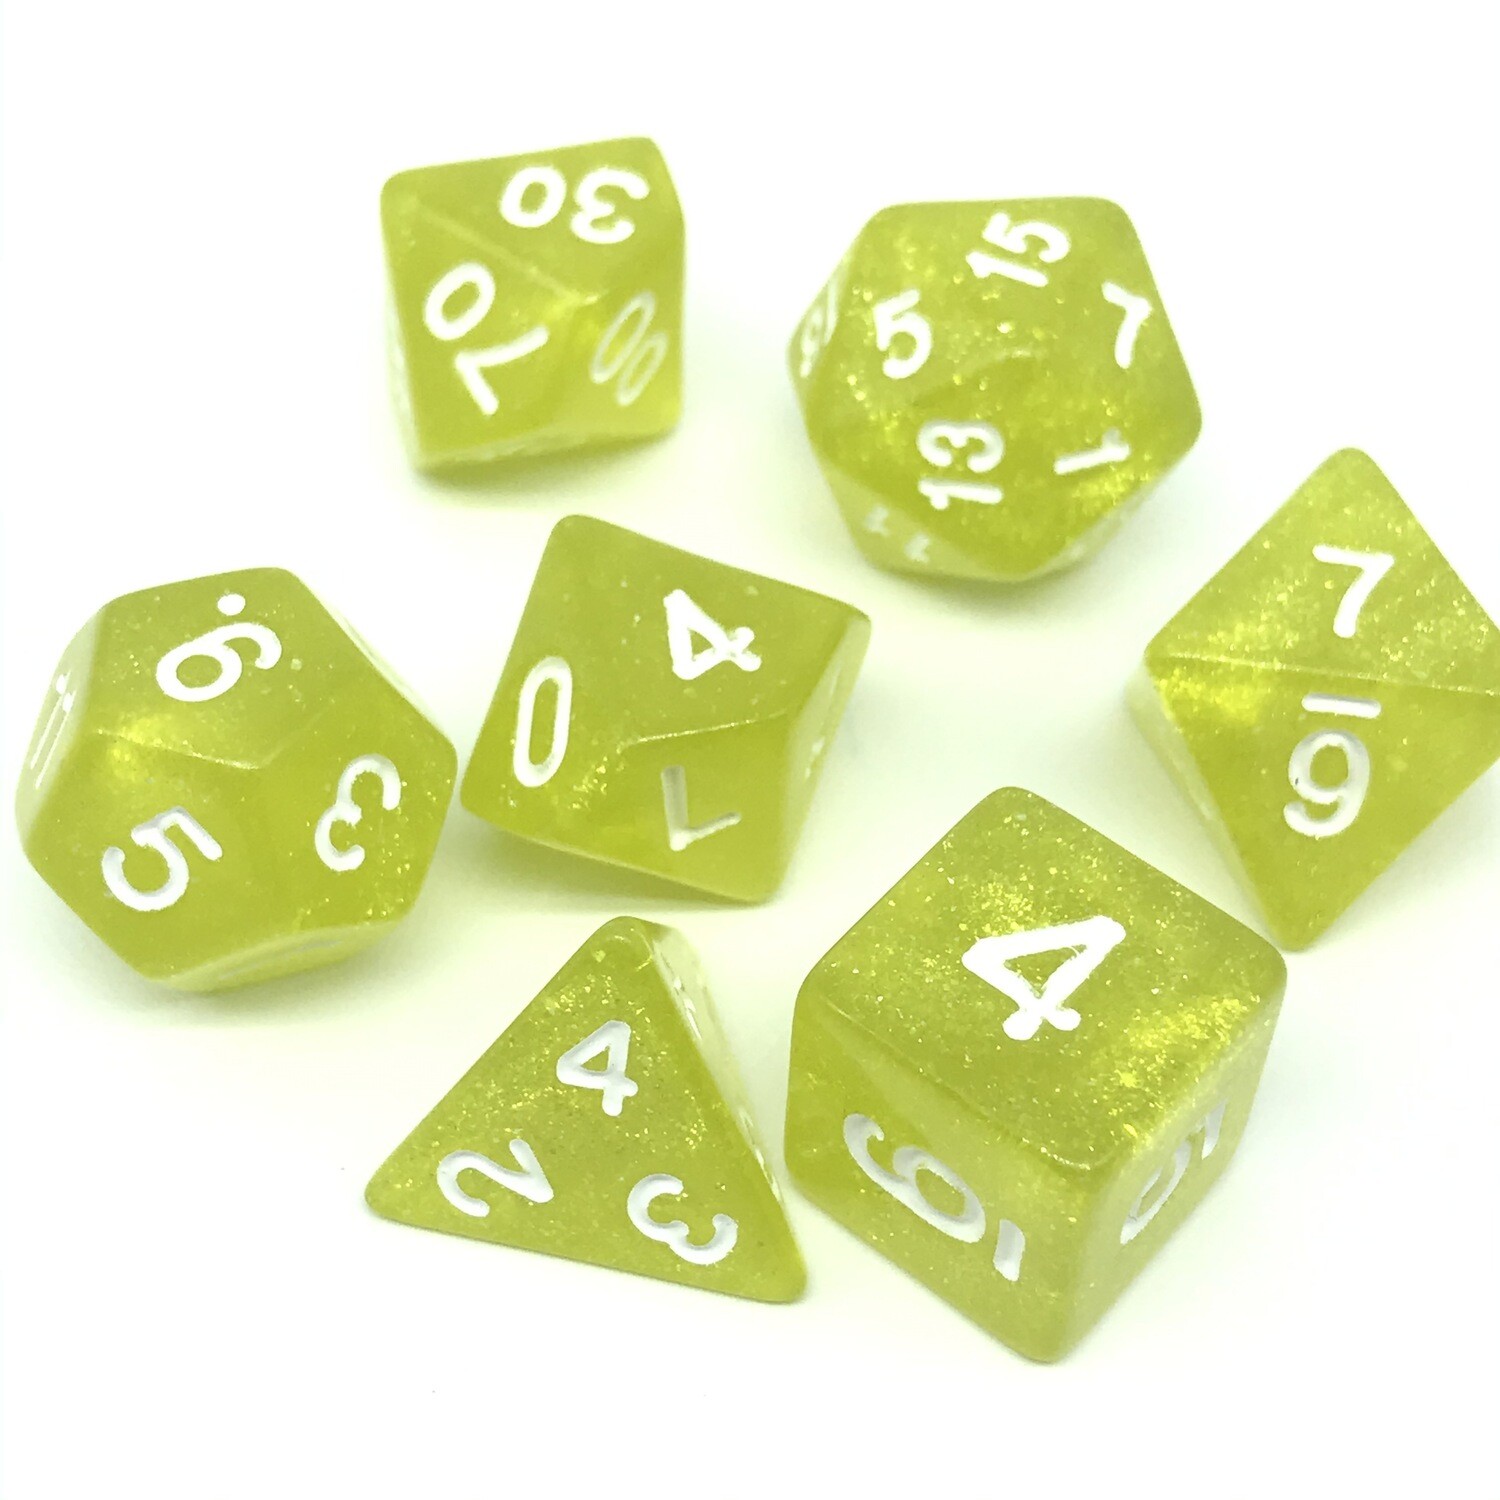 Dice Set - Yellow sparkly with white numbers